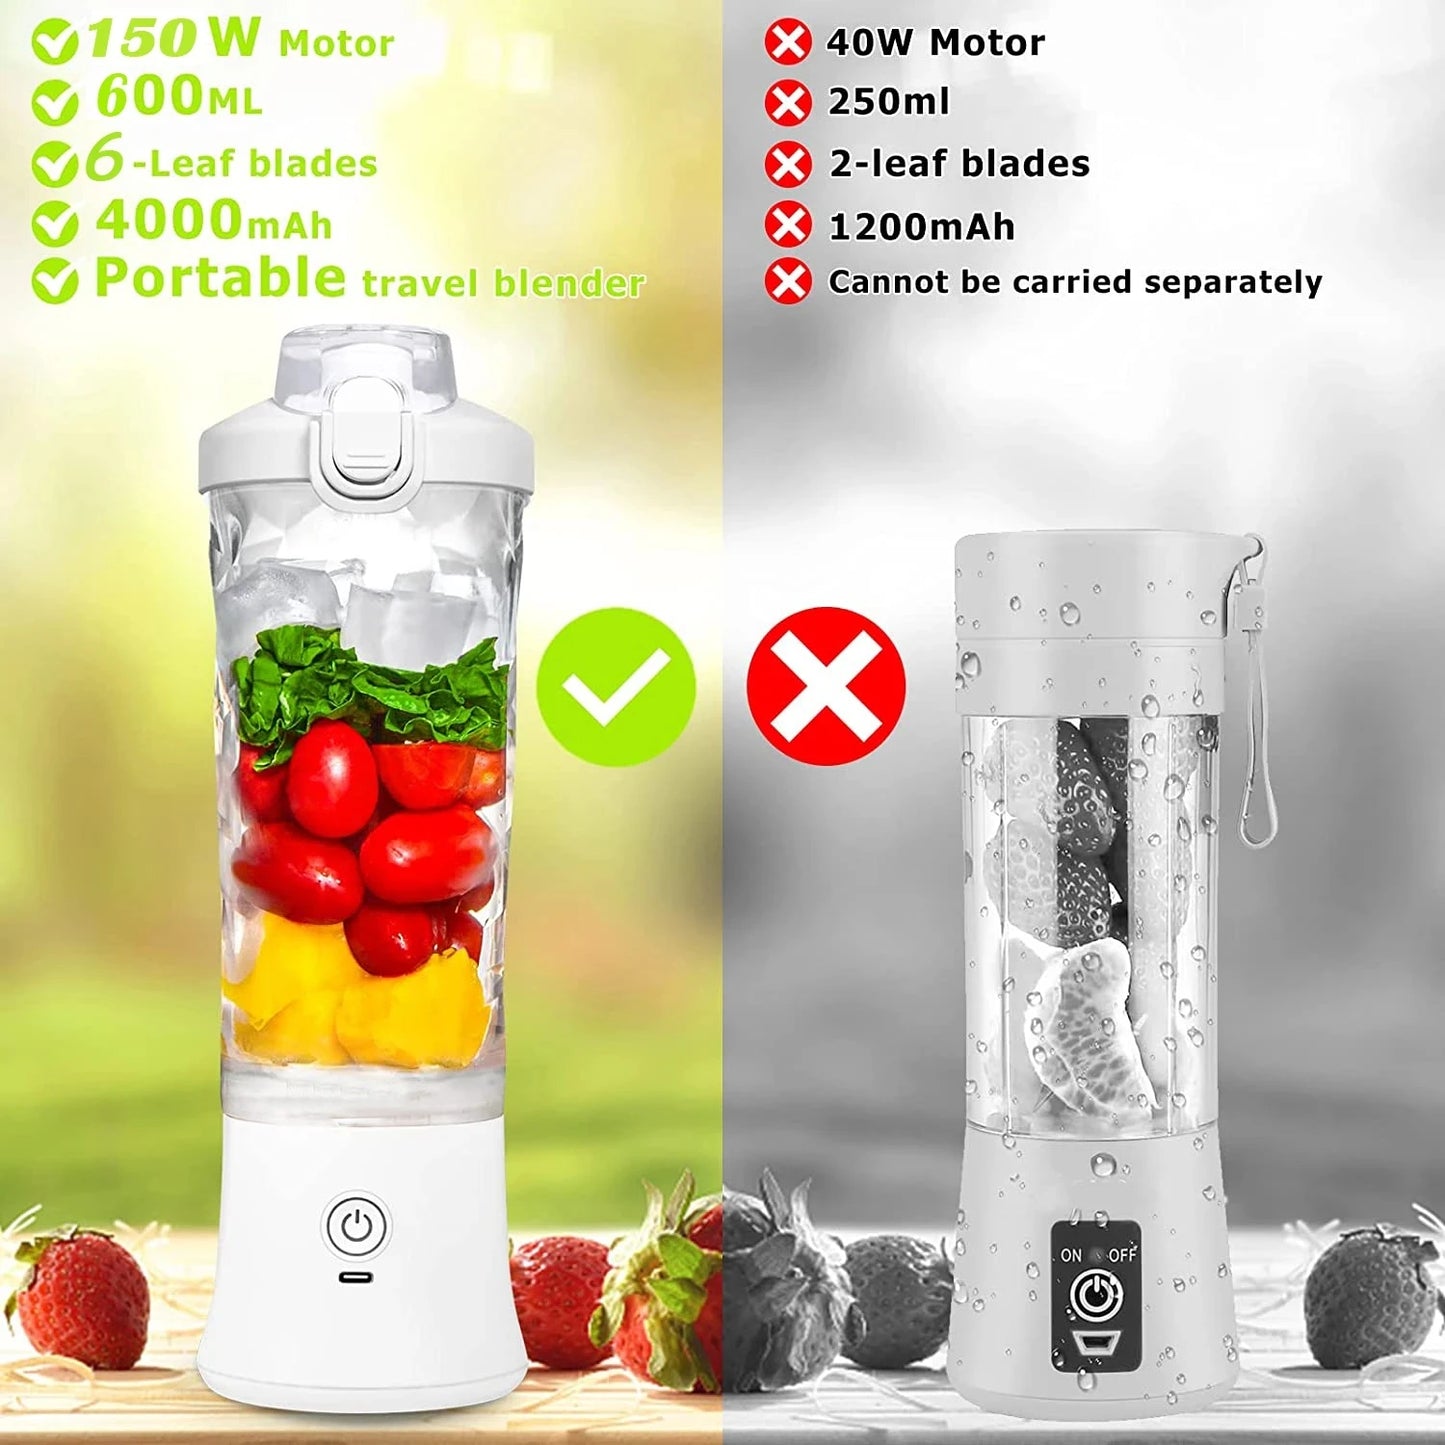 New Portable Blender 600ML Electric Juicer Fruit Mixers 4000mAh USB Rechargeable Smoothie Mini Blender Personal Juicer colorf